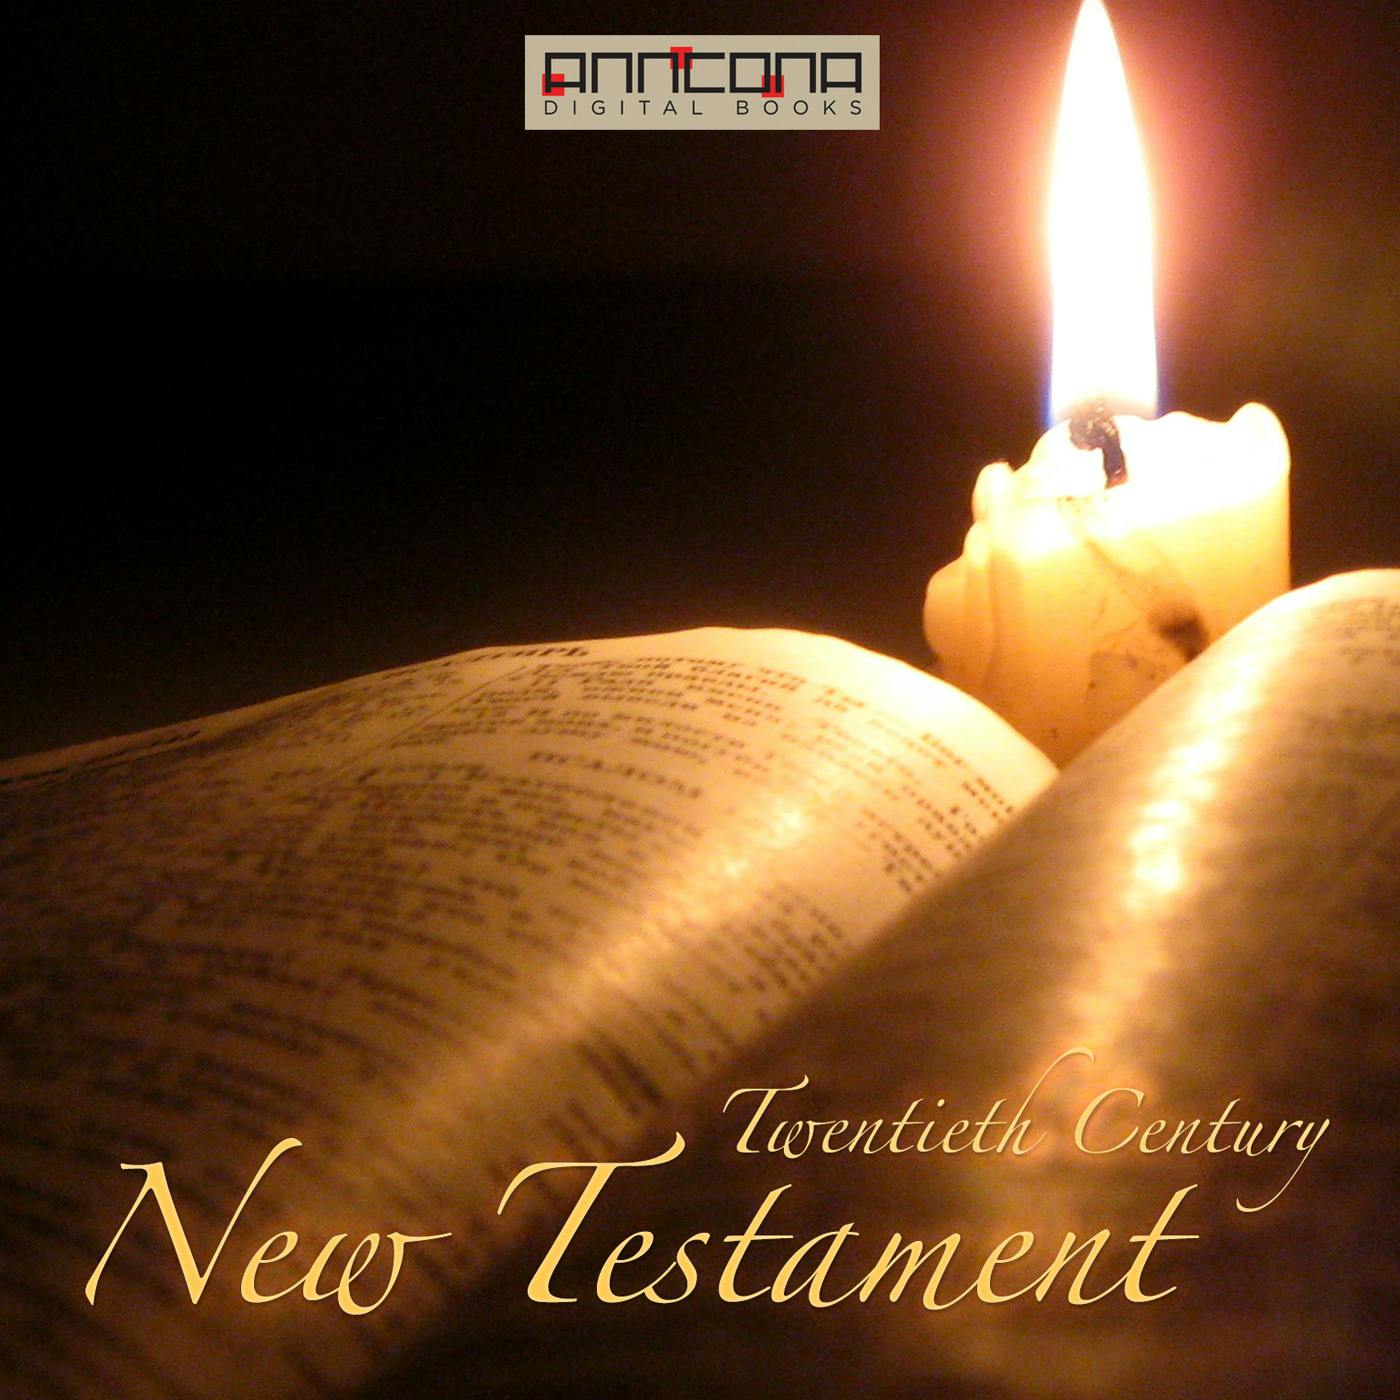 The Bible - 20th Century New Testament - undefined